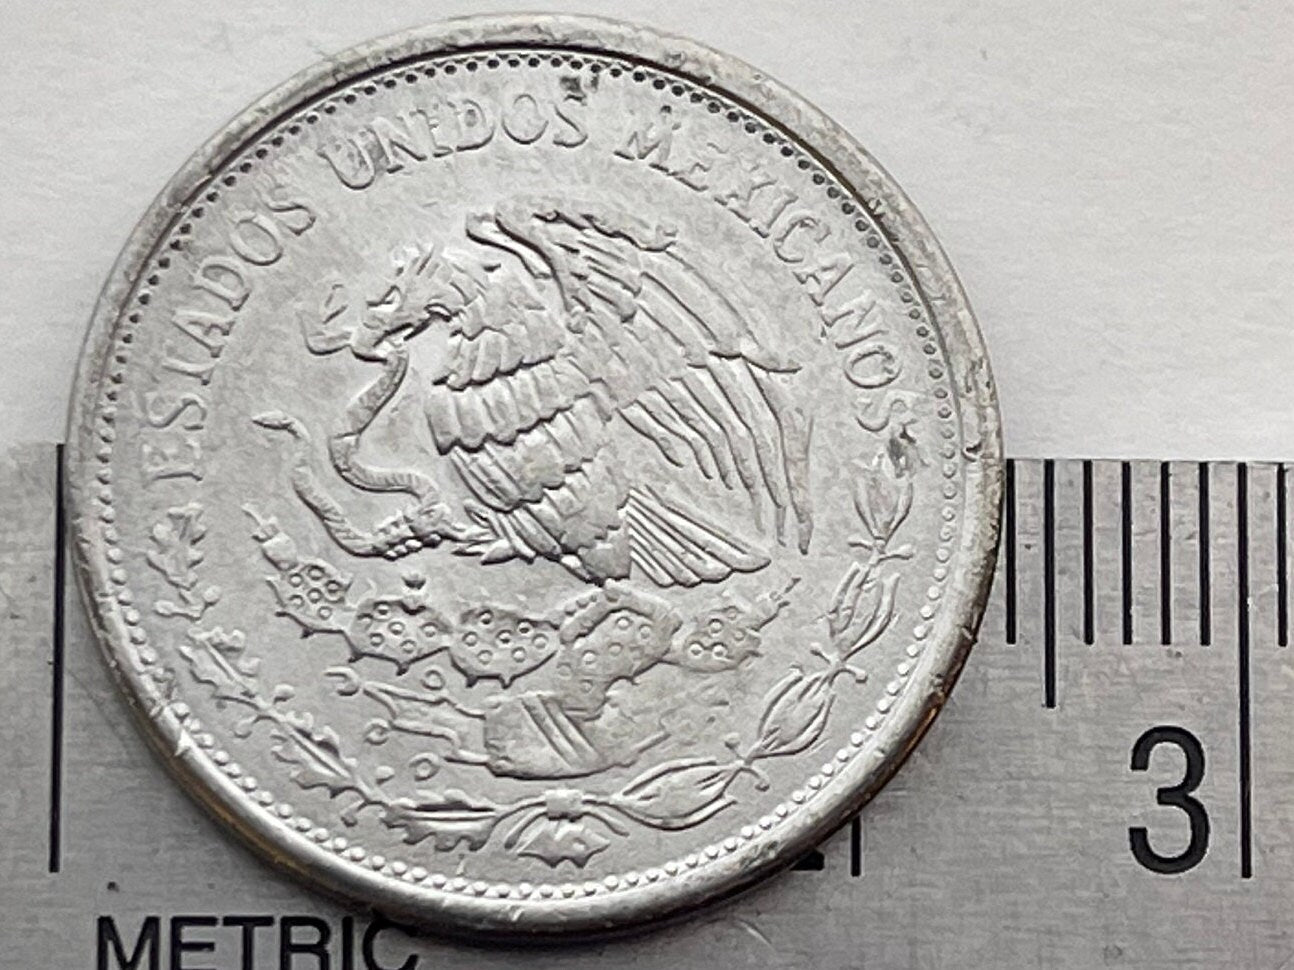 President Benito Juárez & Eagle with Snake 50 Pesos Mexico Authentic Coin Money for Jewelry and Craft Making